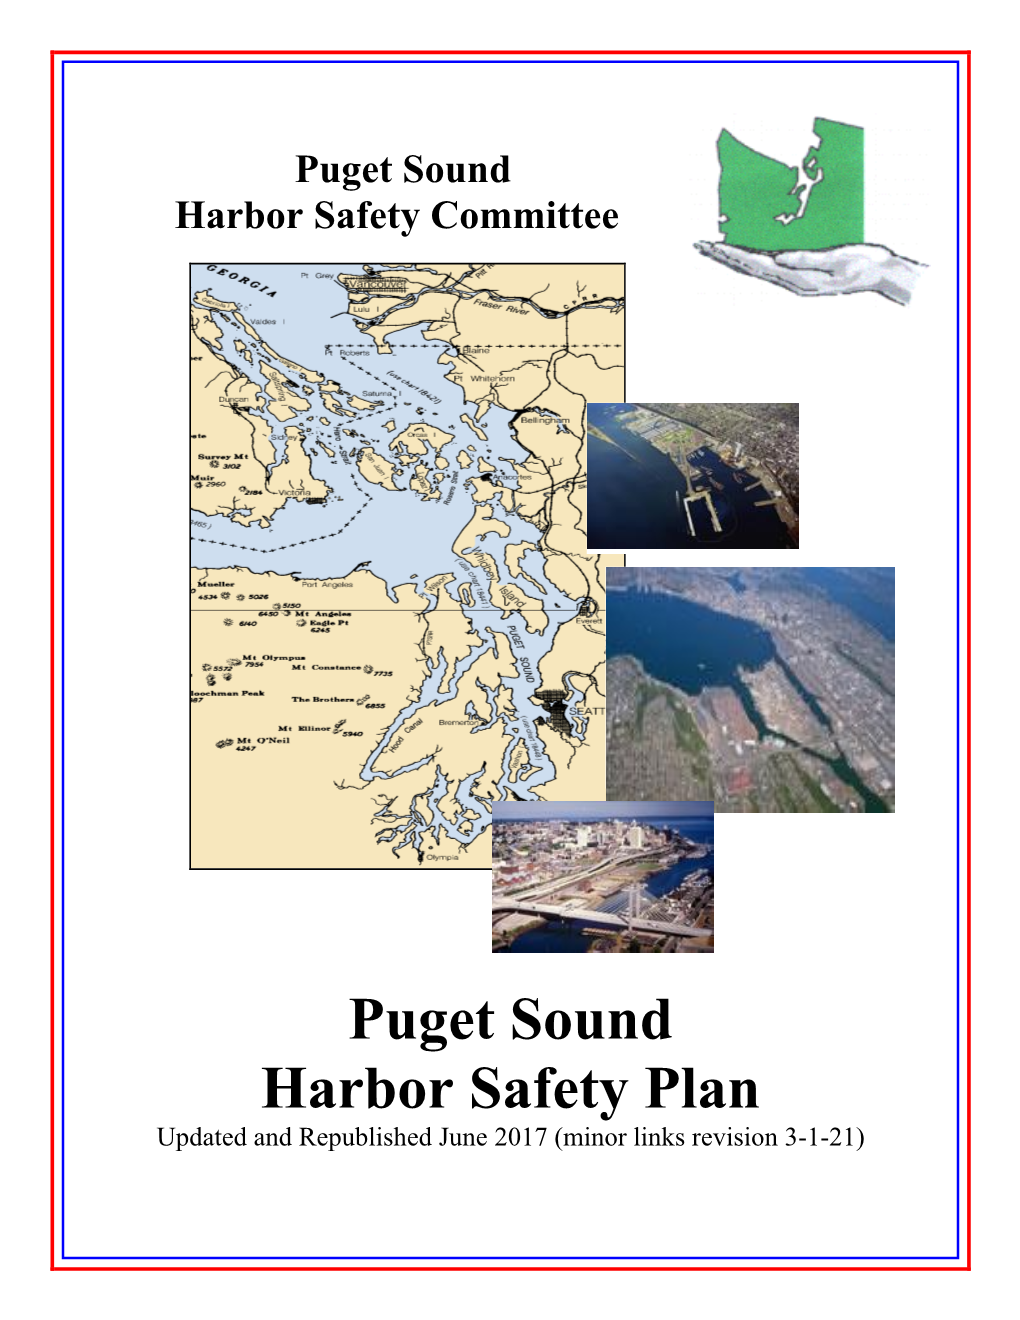 Puget Sound Harbor Safety Plan Updated and Republished June 2017 (Minor Links Revision 3-1-21)